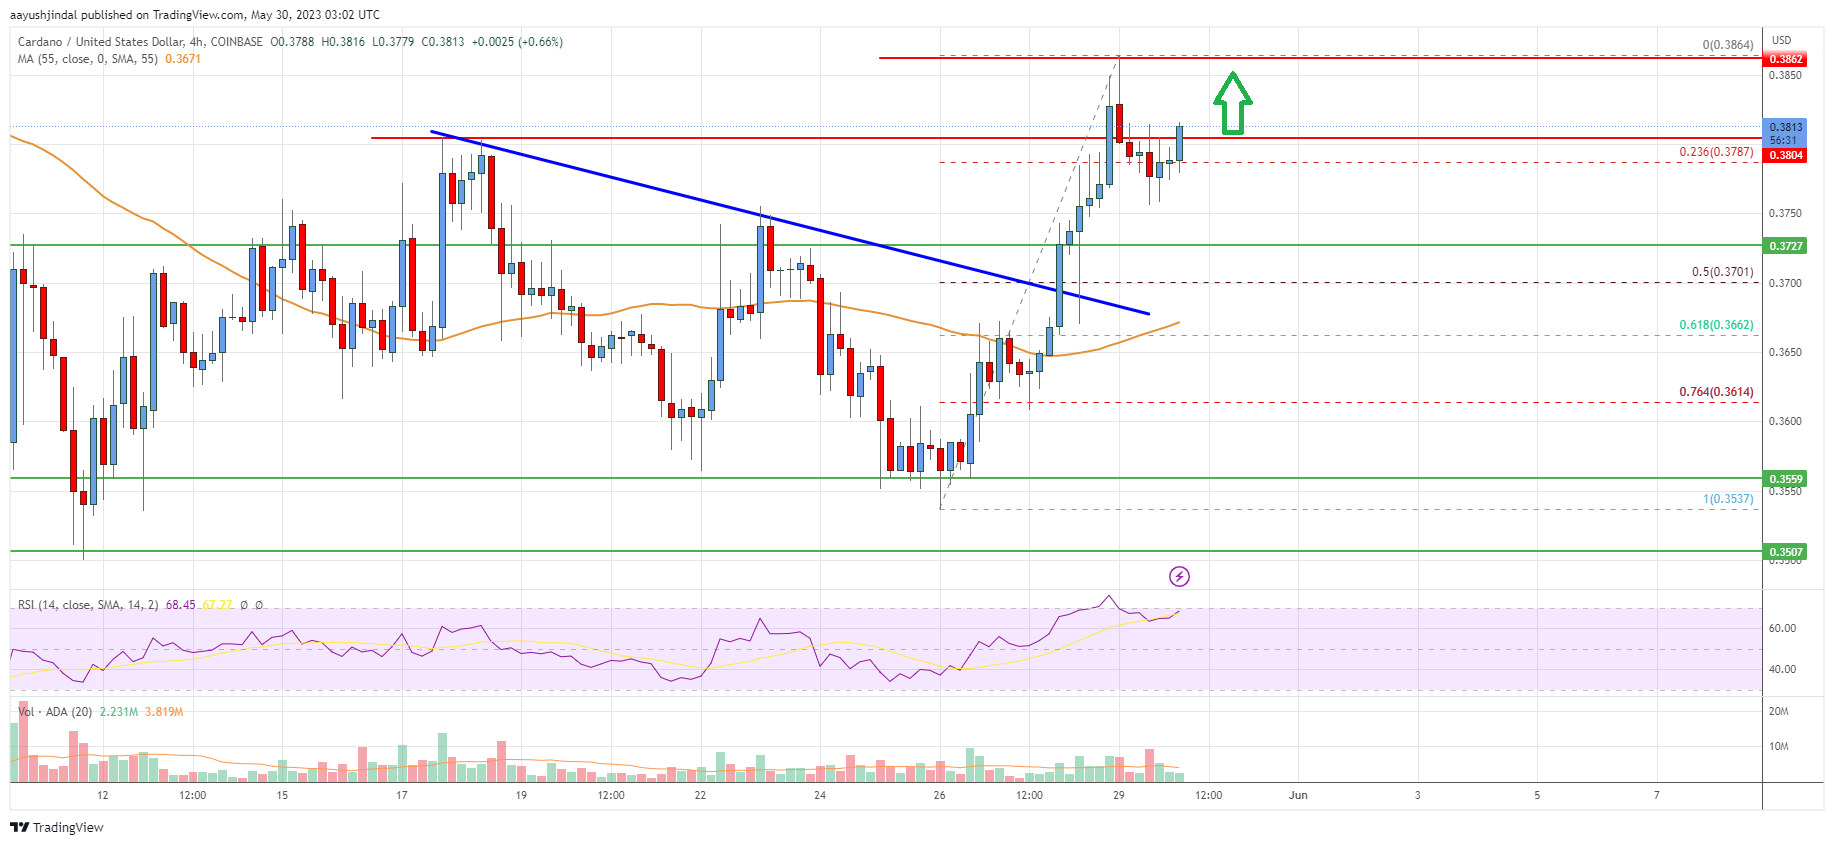 Cardano (ADA) Price Analysis: Recovery Could Gain Pace Above $0.385